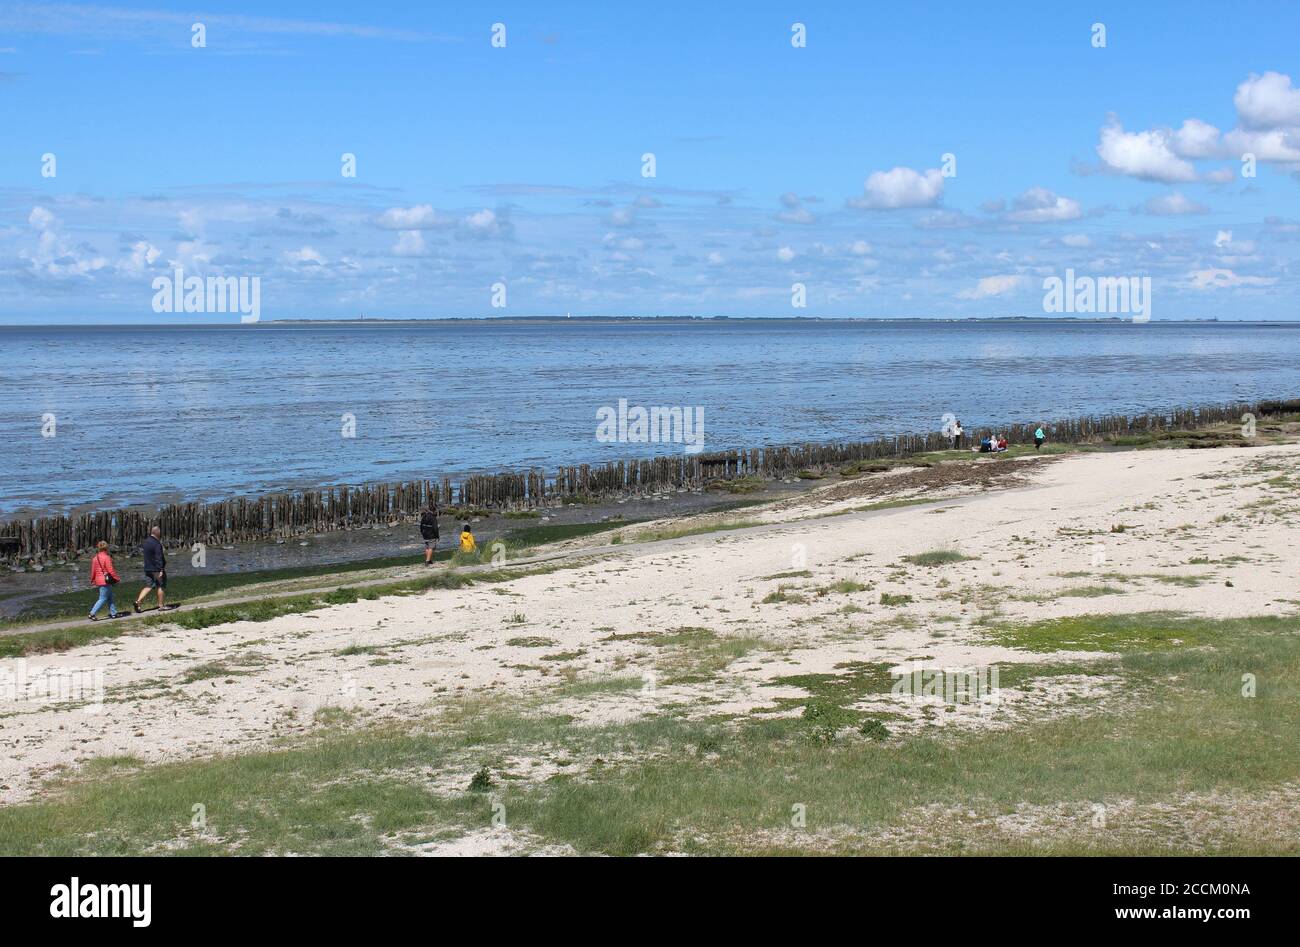 MODDERGAT, NETHERLANDS, 21 JULY 2020: Tourists walk along the beach at low tide at Moddergat on the Wadden sea. Moddergat is a small village in Friesl Stock Photo